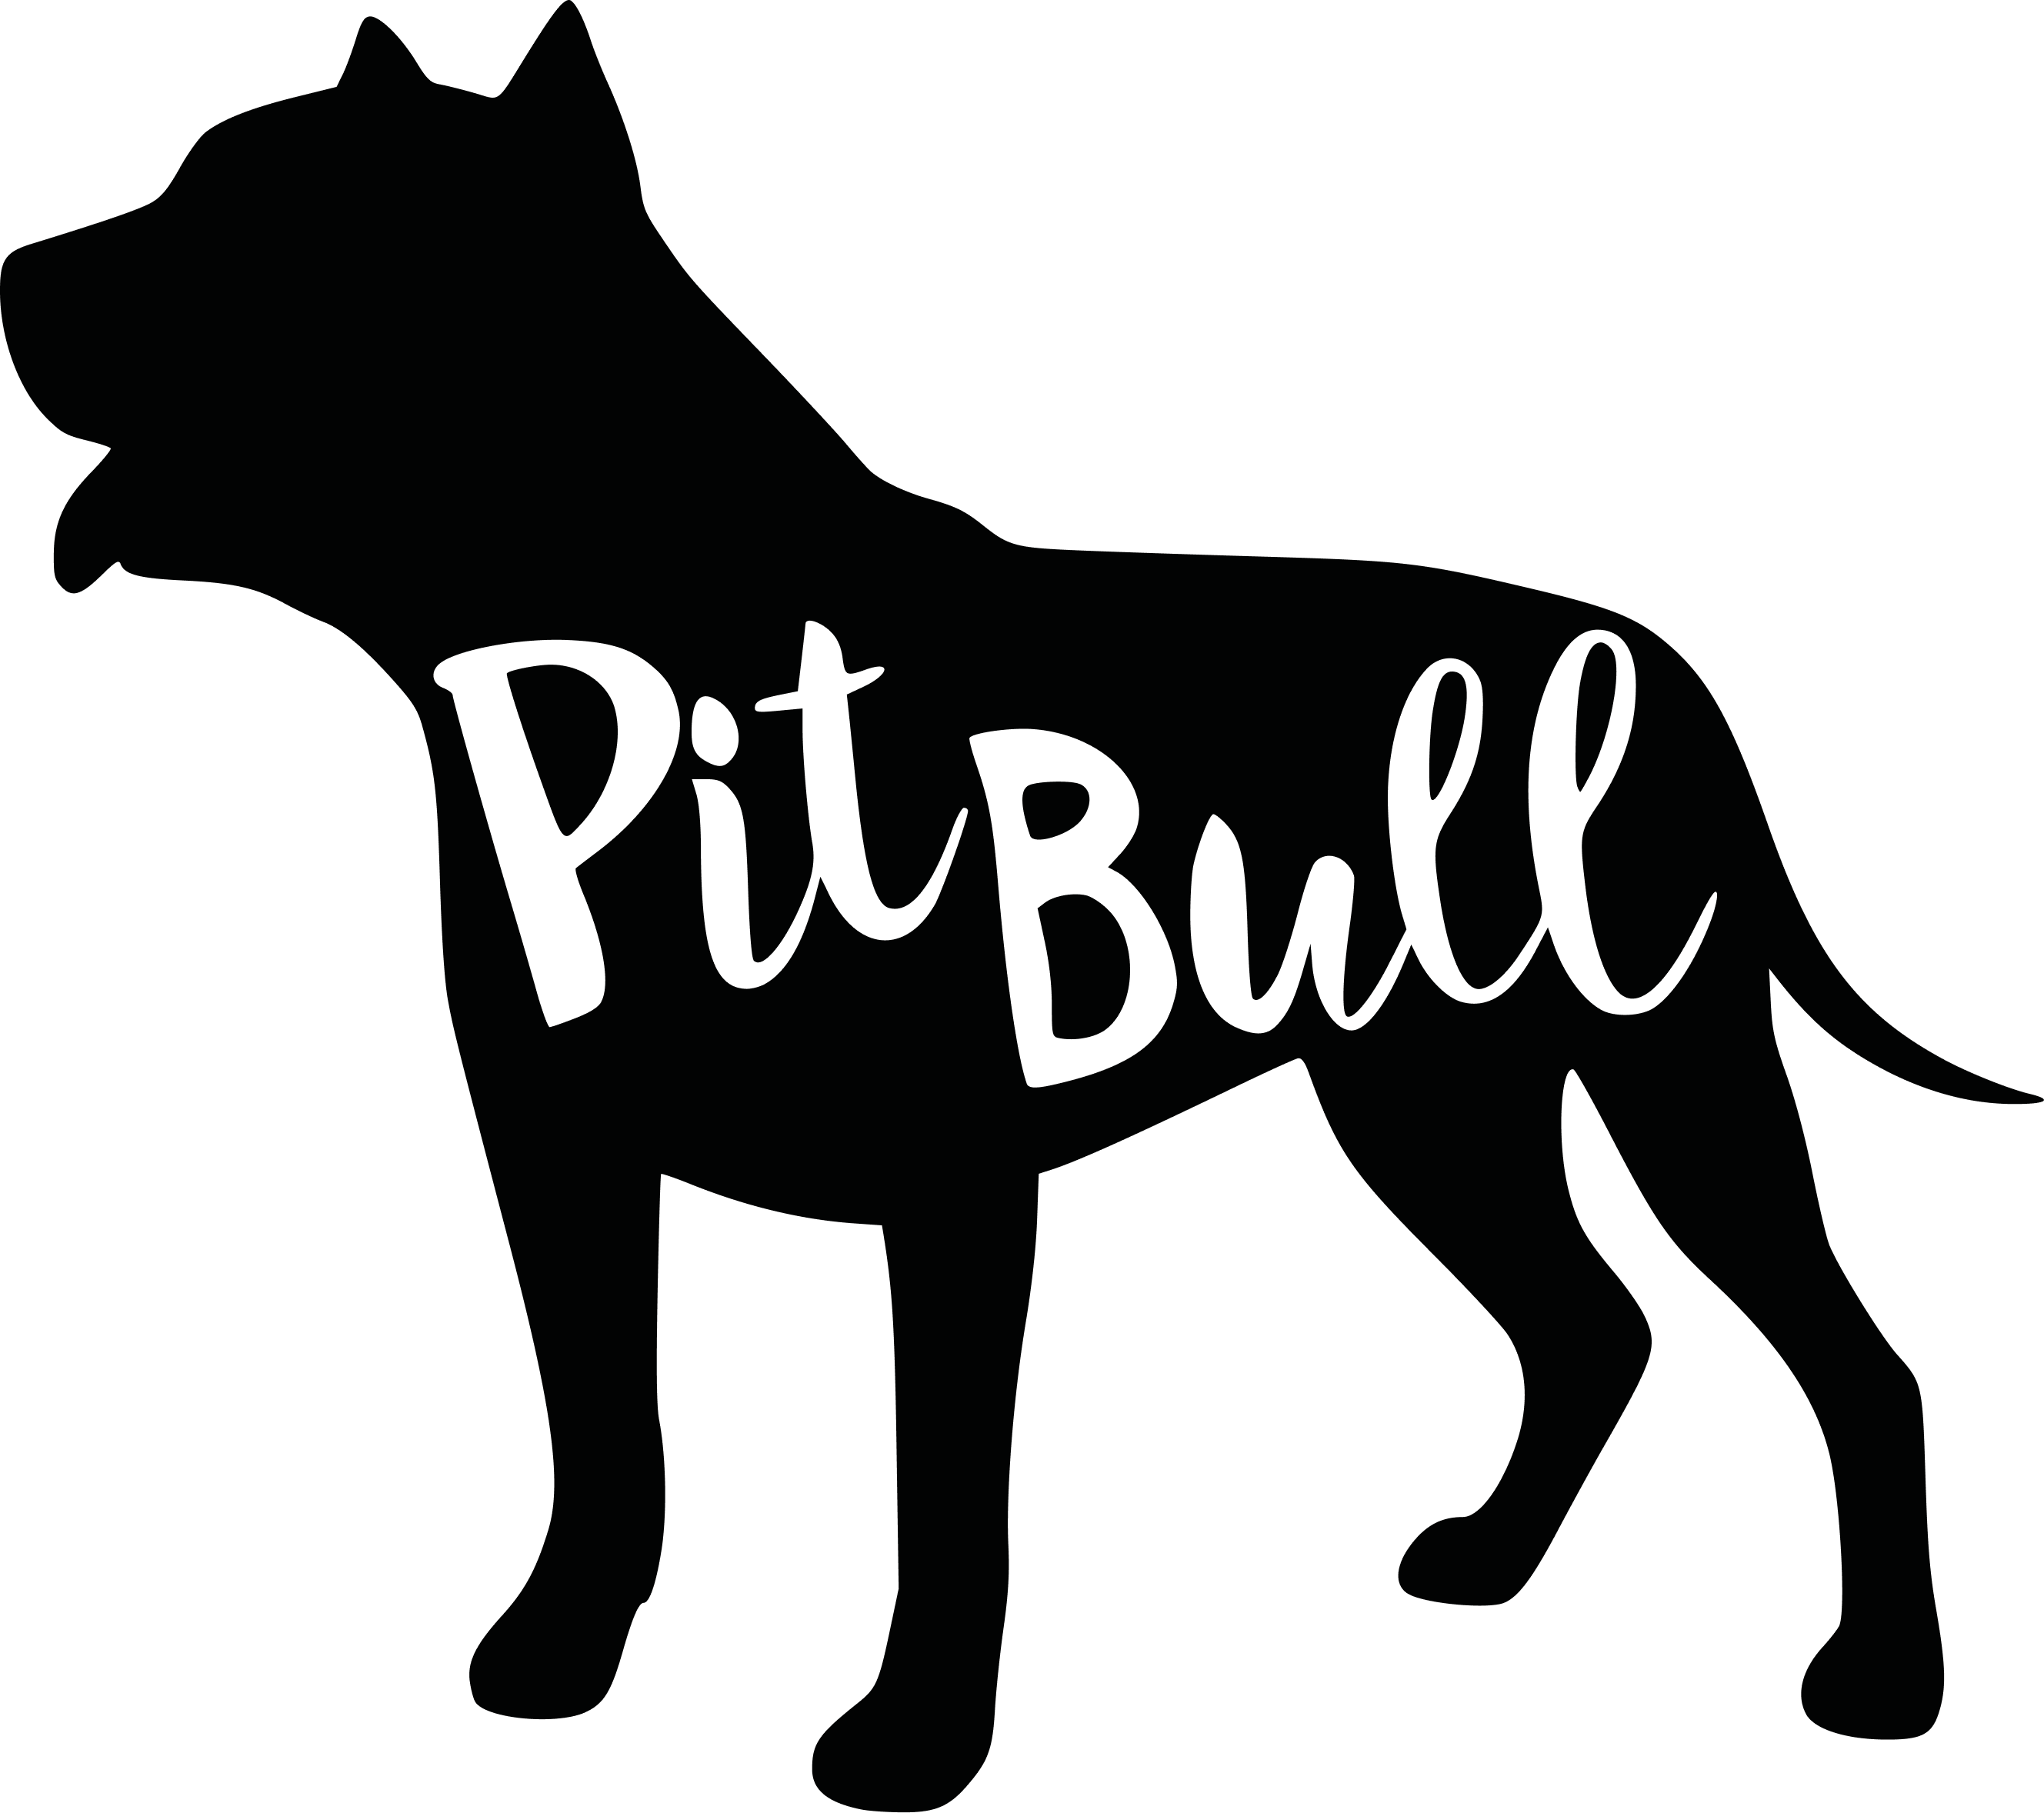 Black silhouette of a dog with the word pitbull on it.